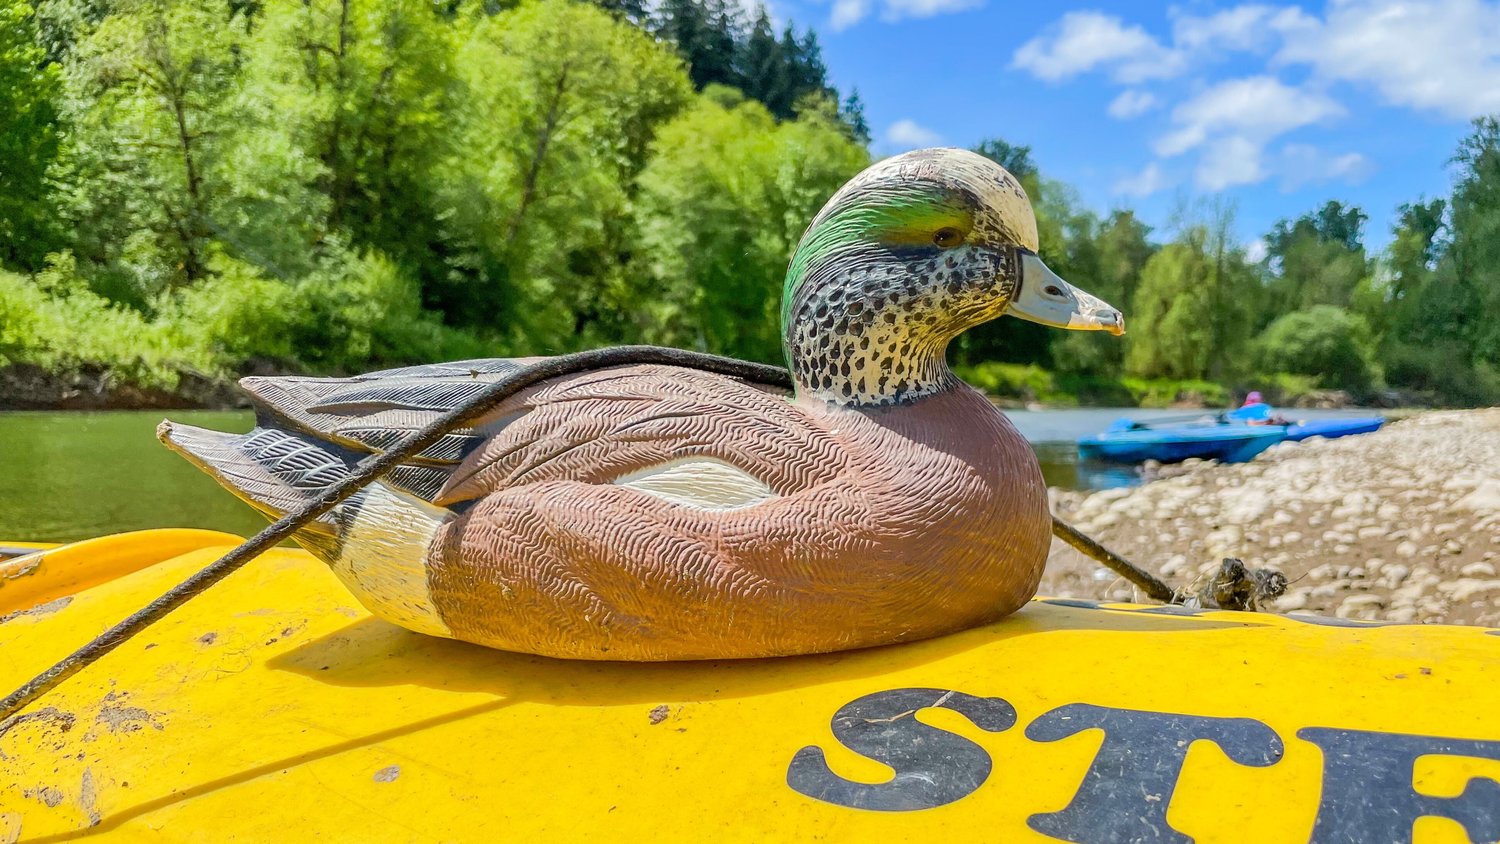 A decoy duck found floating in the Chehalis River serves as a figurehead on the front of a kayak while traveling past flying mergansers and swooping eagles in Rochester.